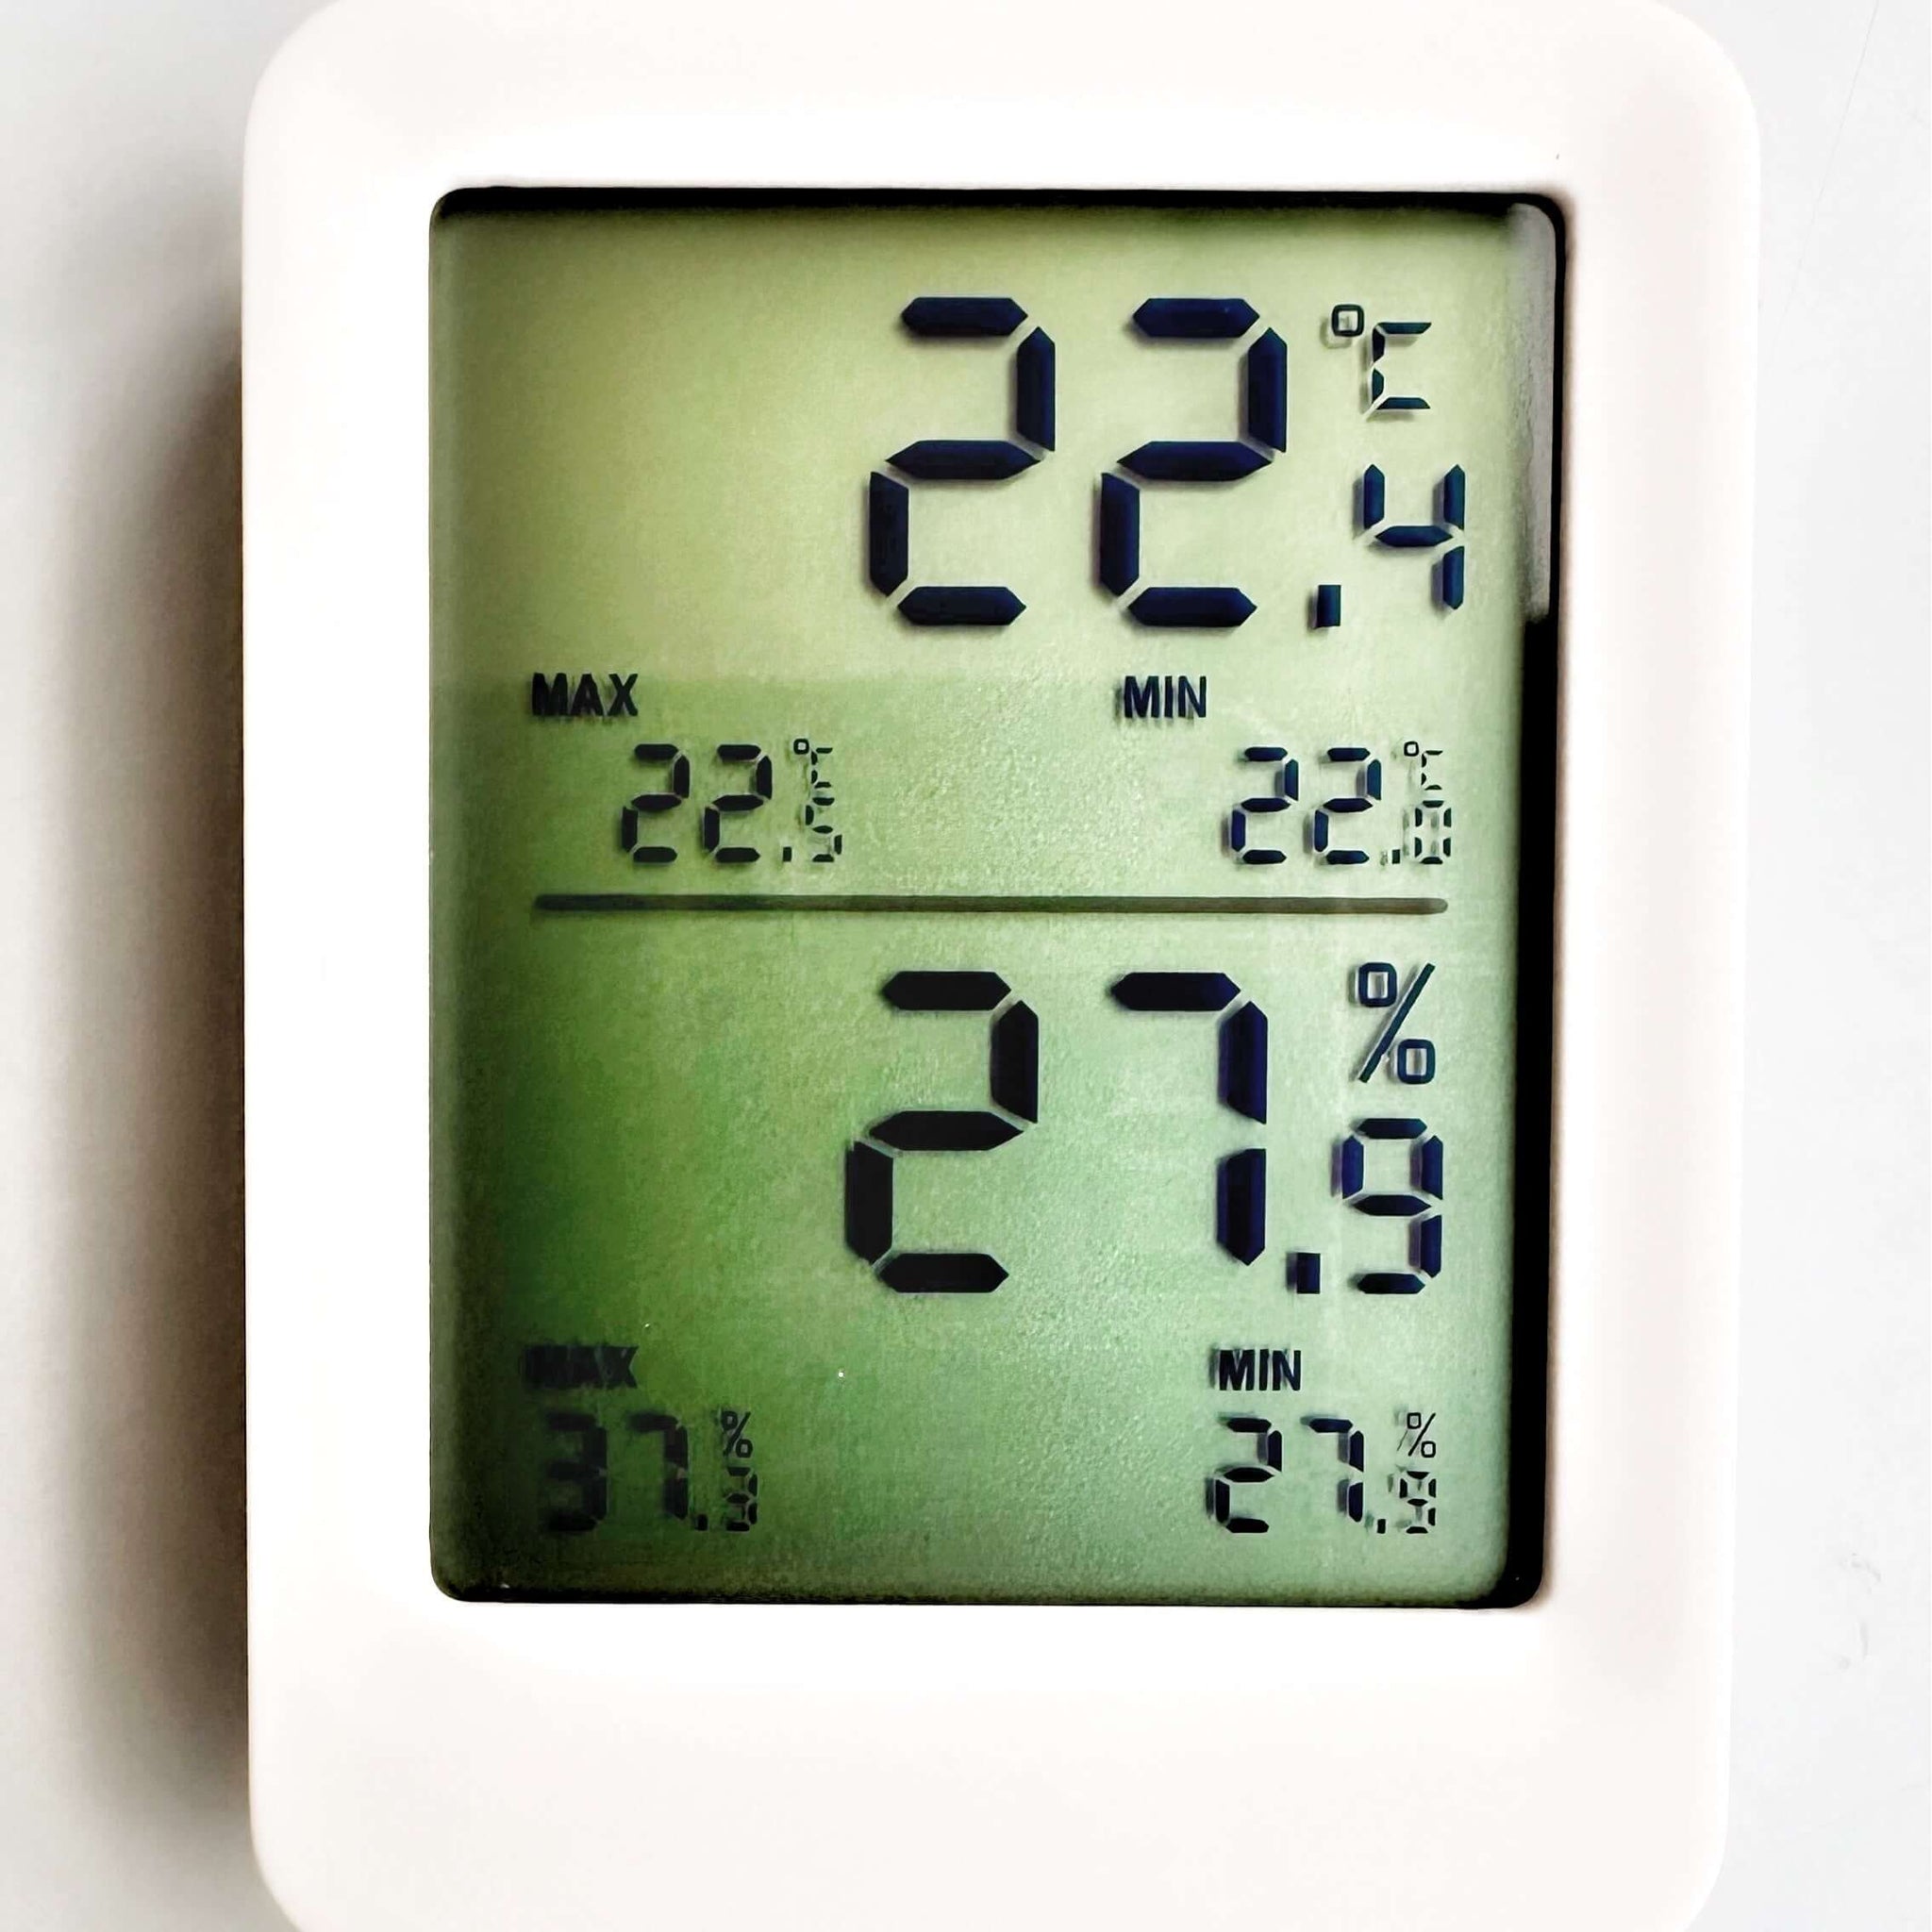 LOA Smart Temp & Humidity and Data Logger (working display) | STOCKHOLM REPTILES